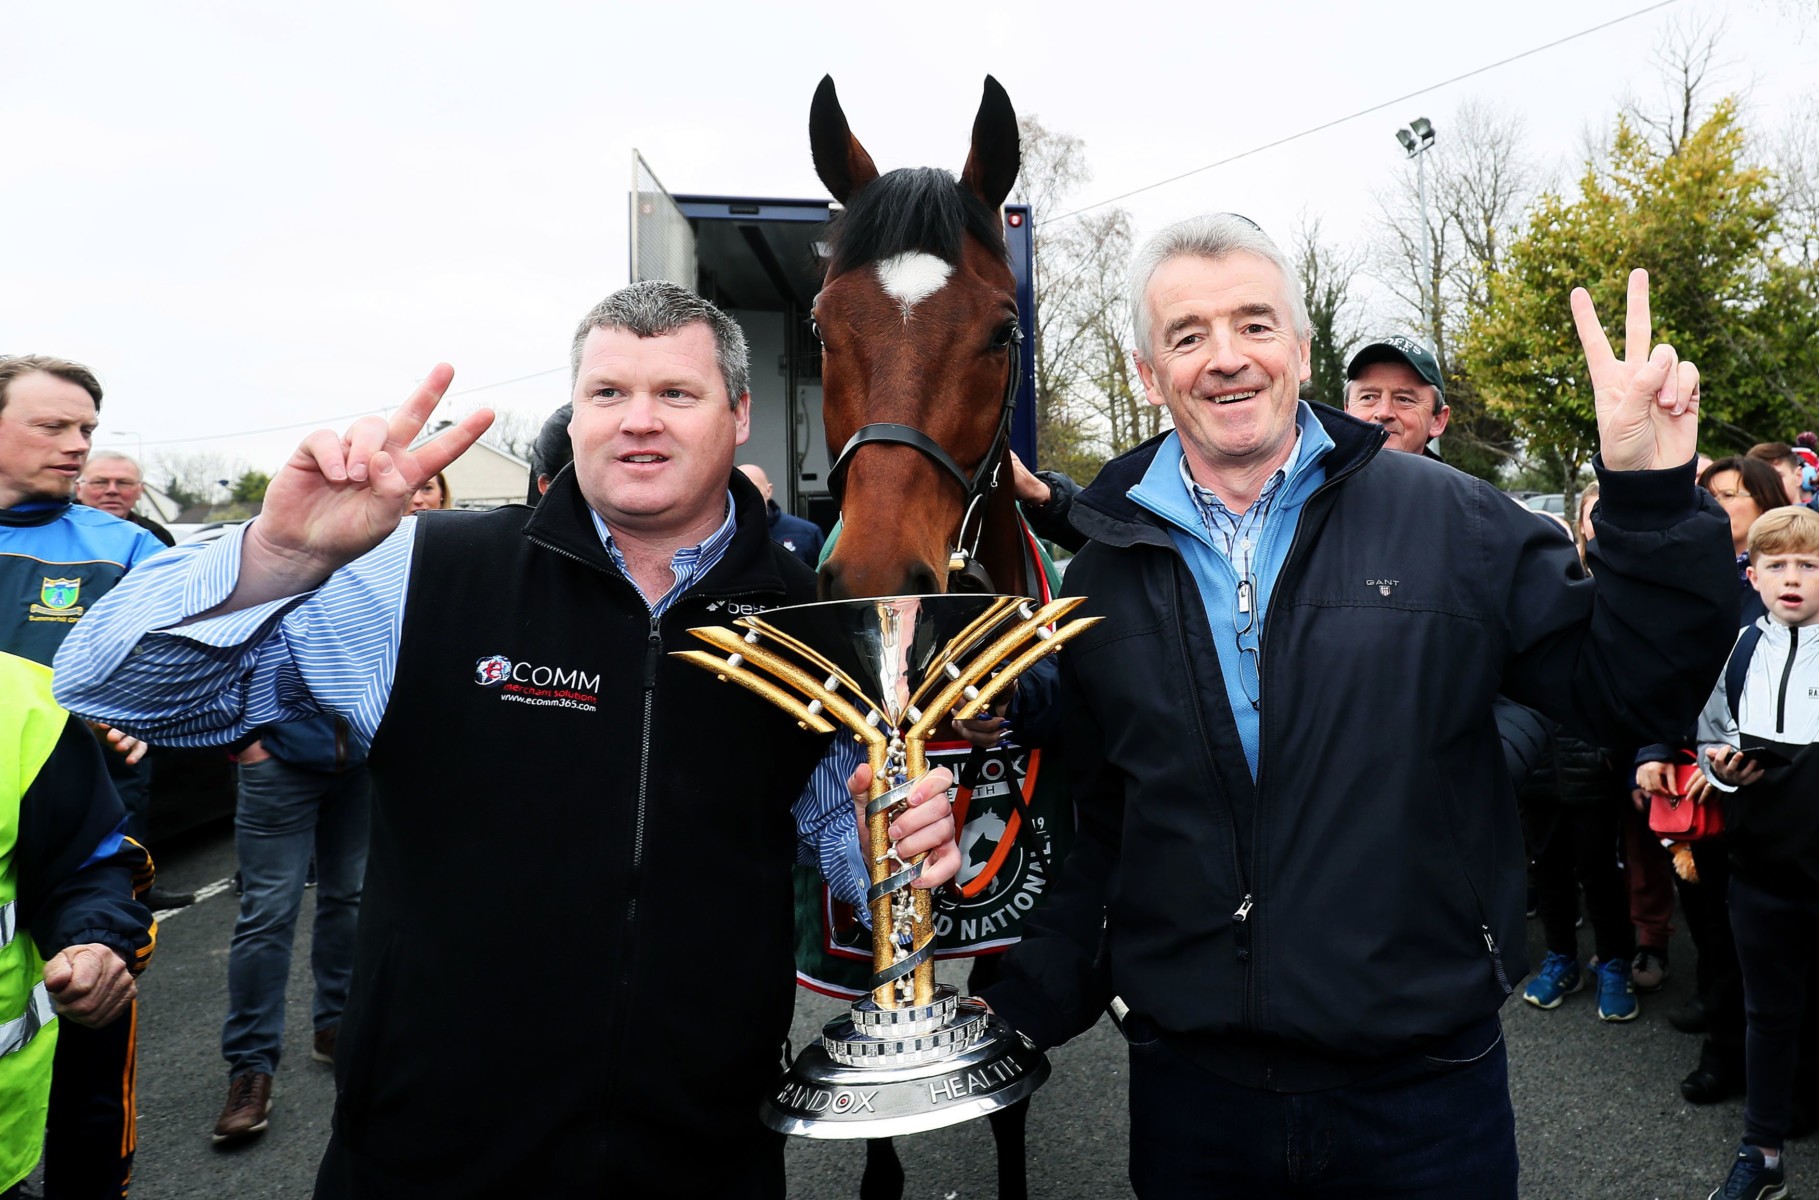 , Grand National 2020: Gordon Elliotts double champ Tiger Roll given joint top weight of 170 in Aintree showpiece